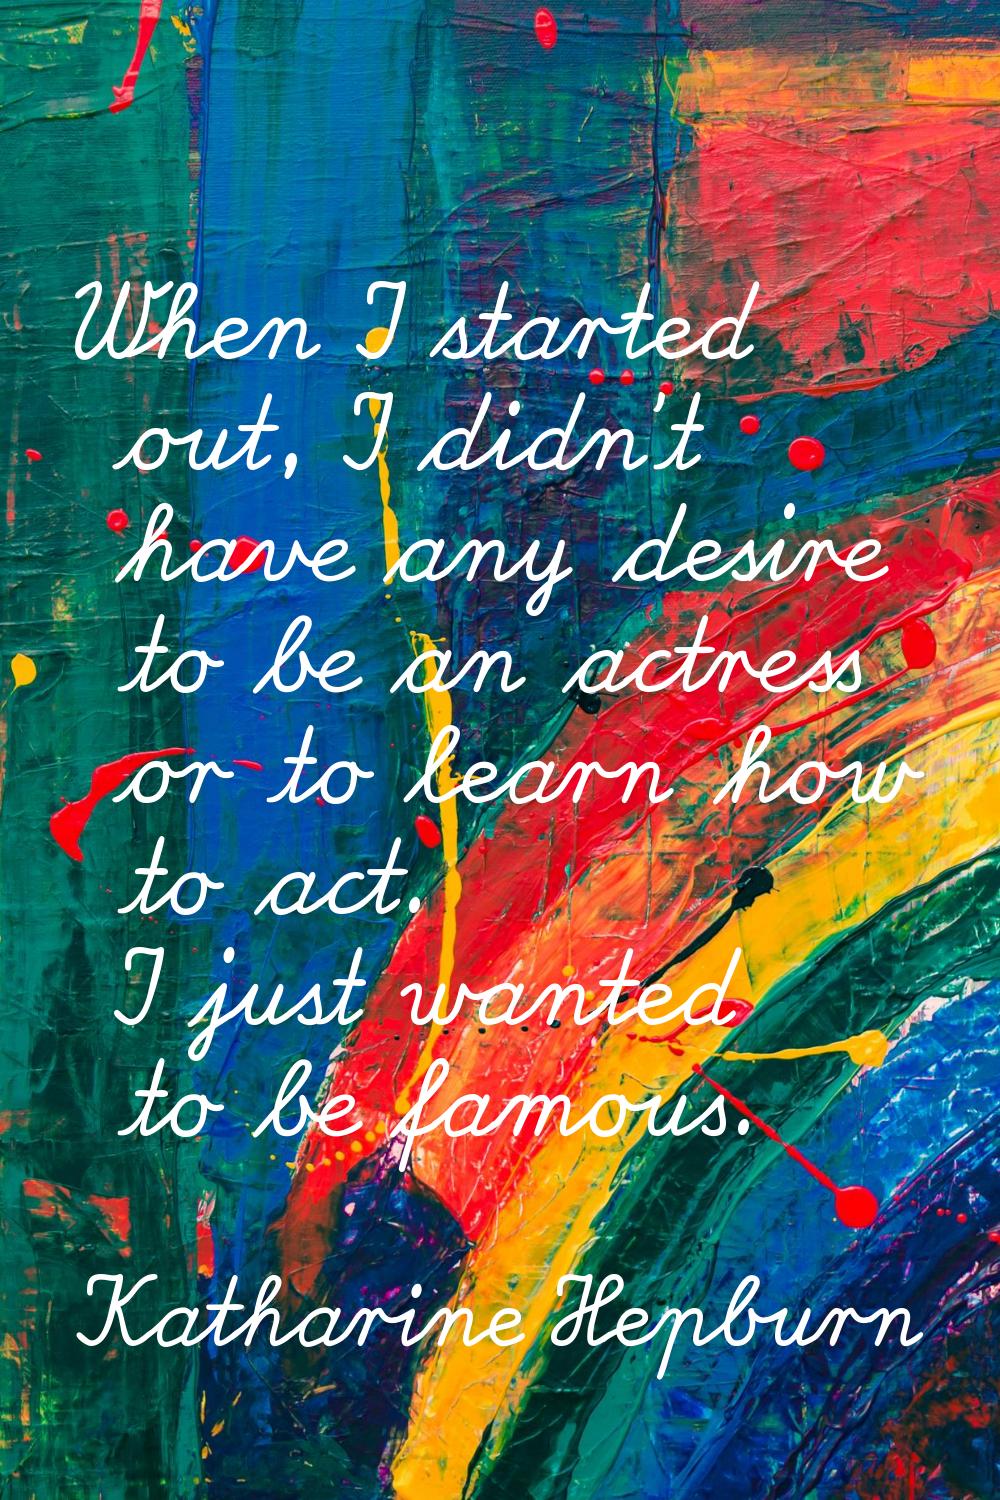 When I started out, I didn't have any desire to be an actress or to learn how to act. I just wanted